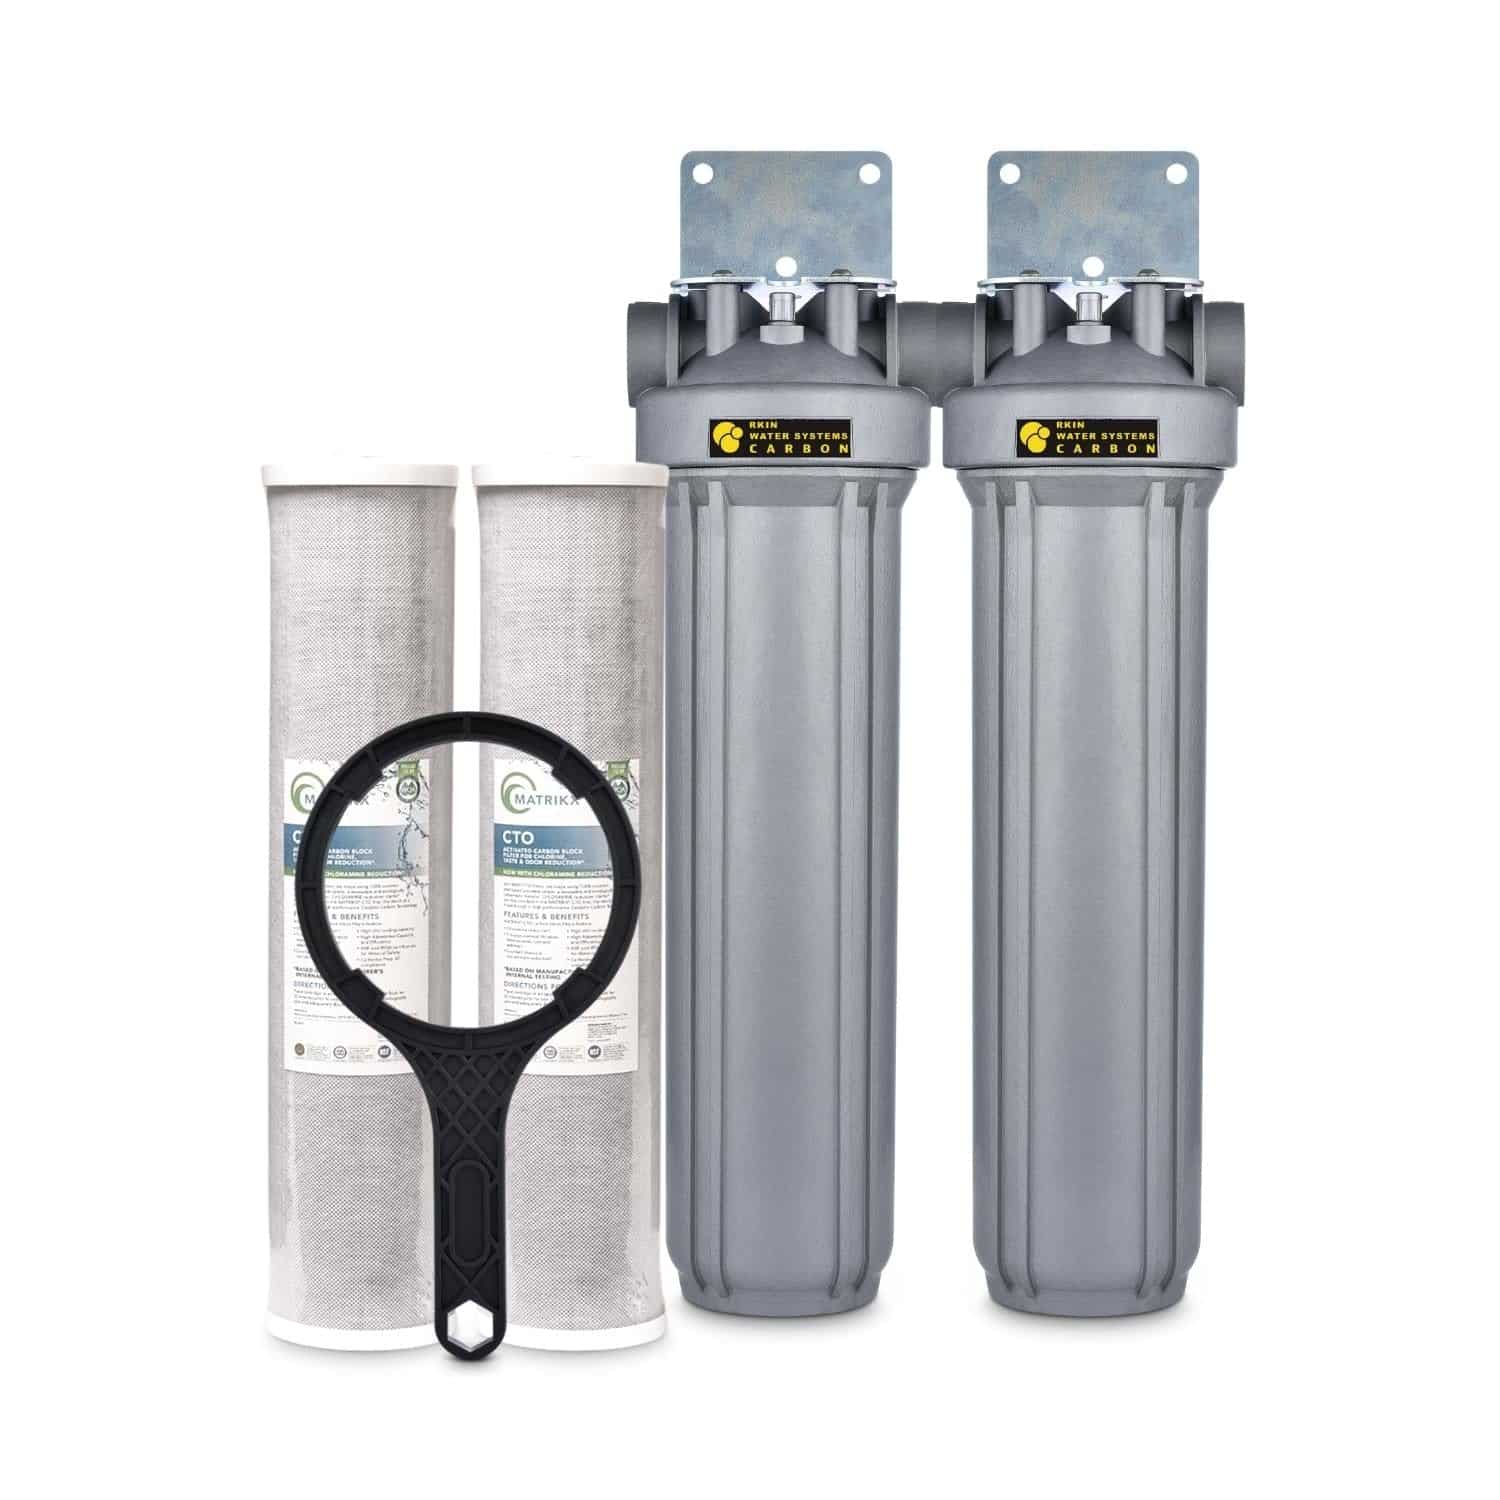 CBS Dual Carbon Whole House Water Filter from RKIN